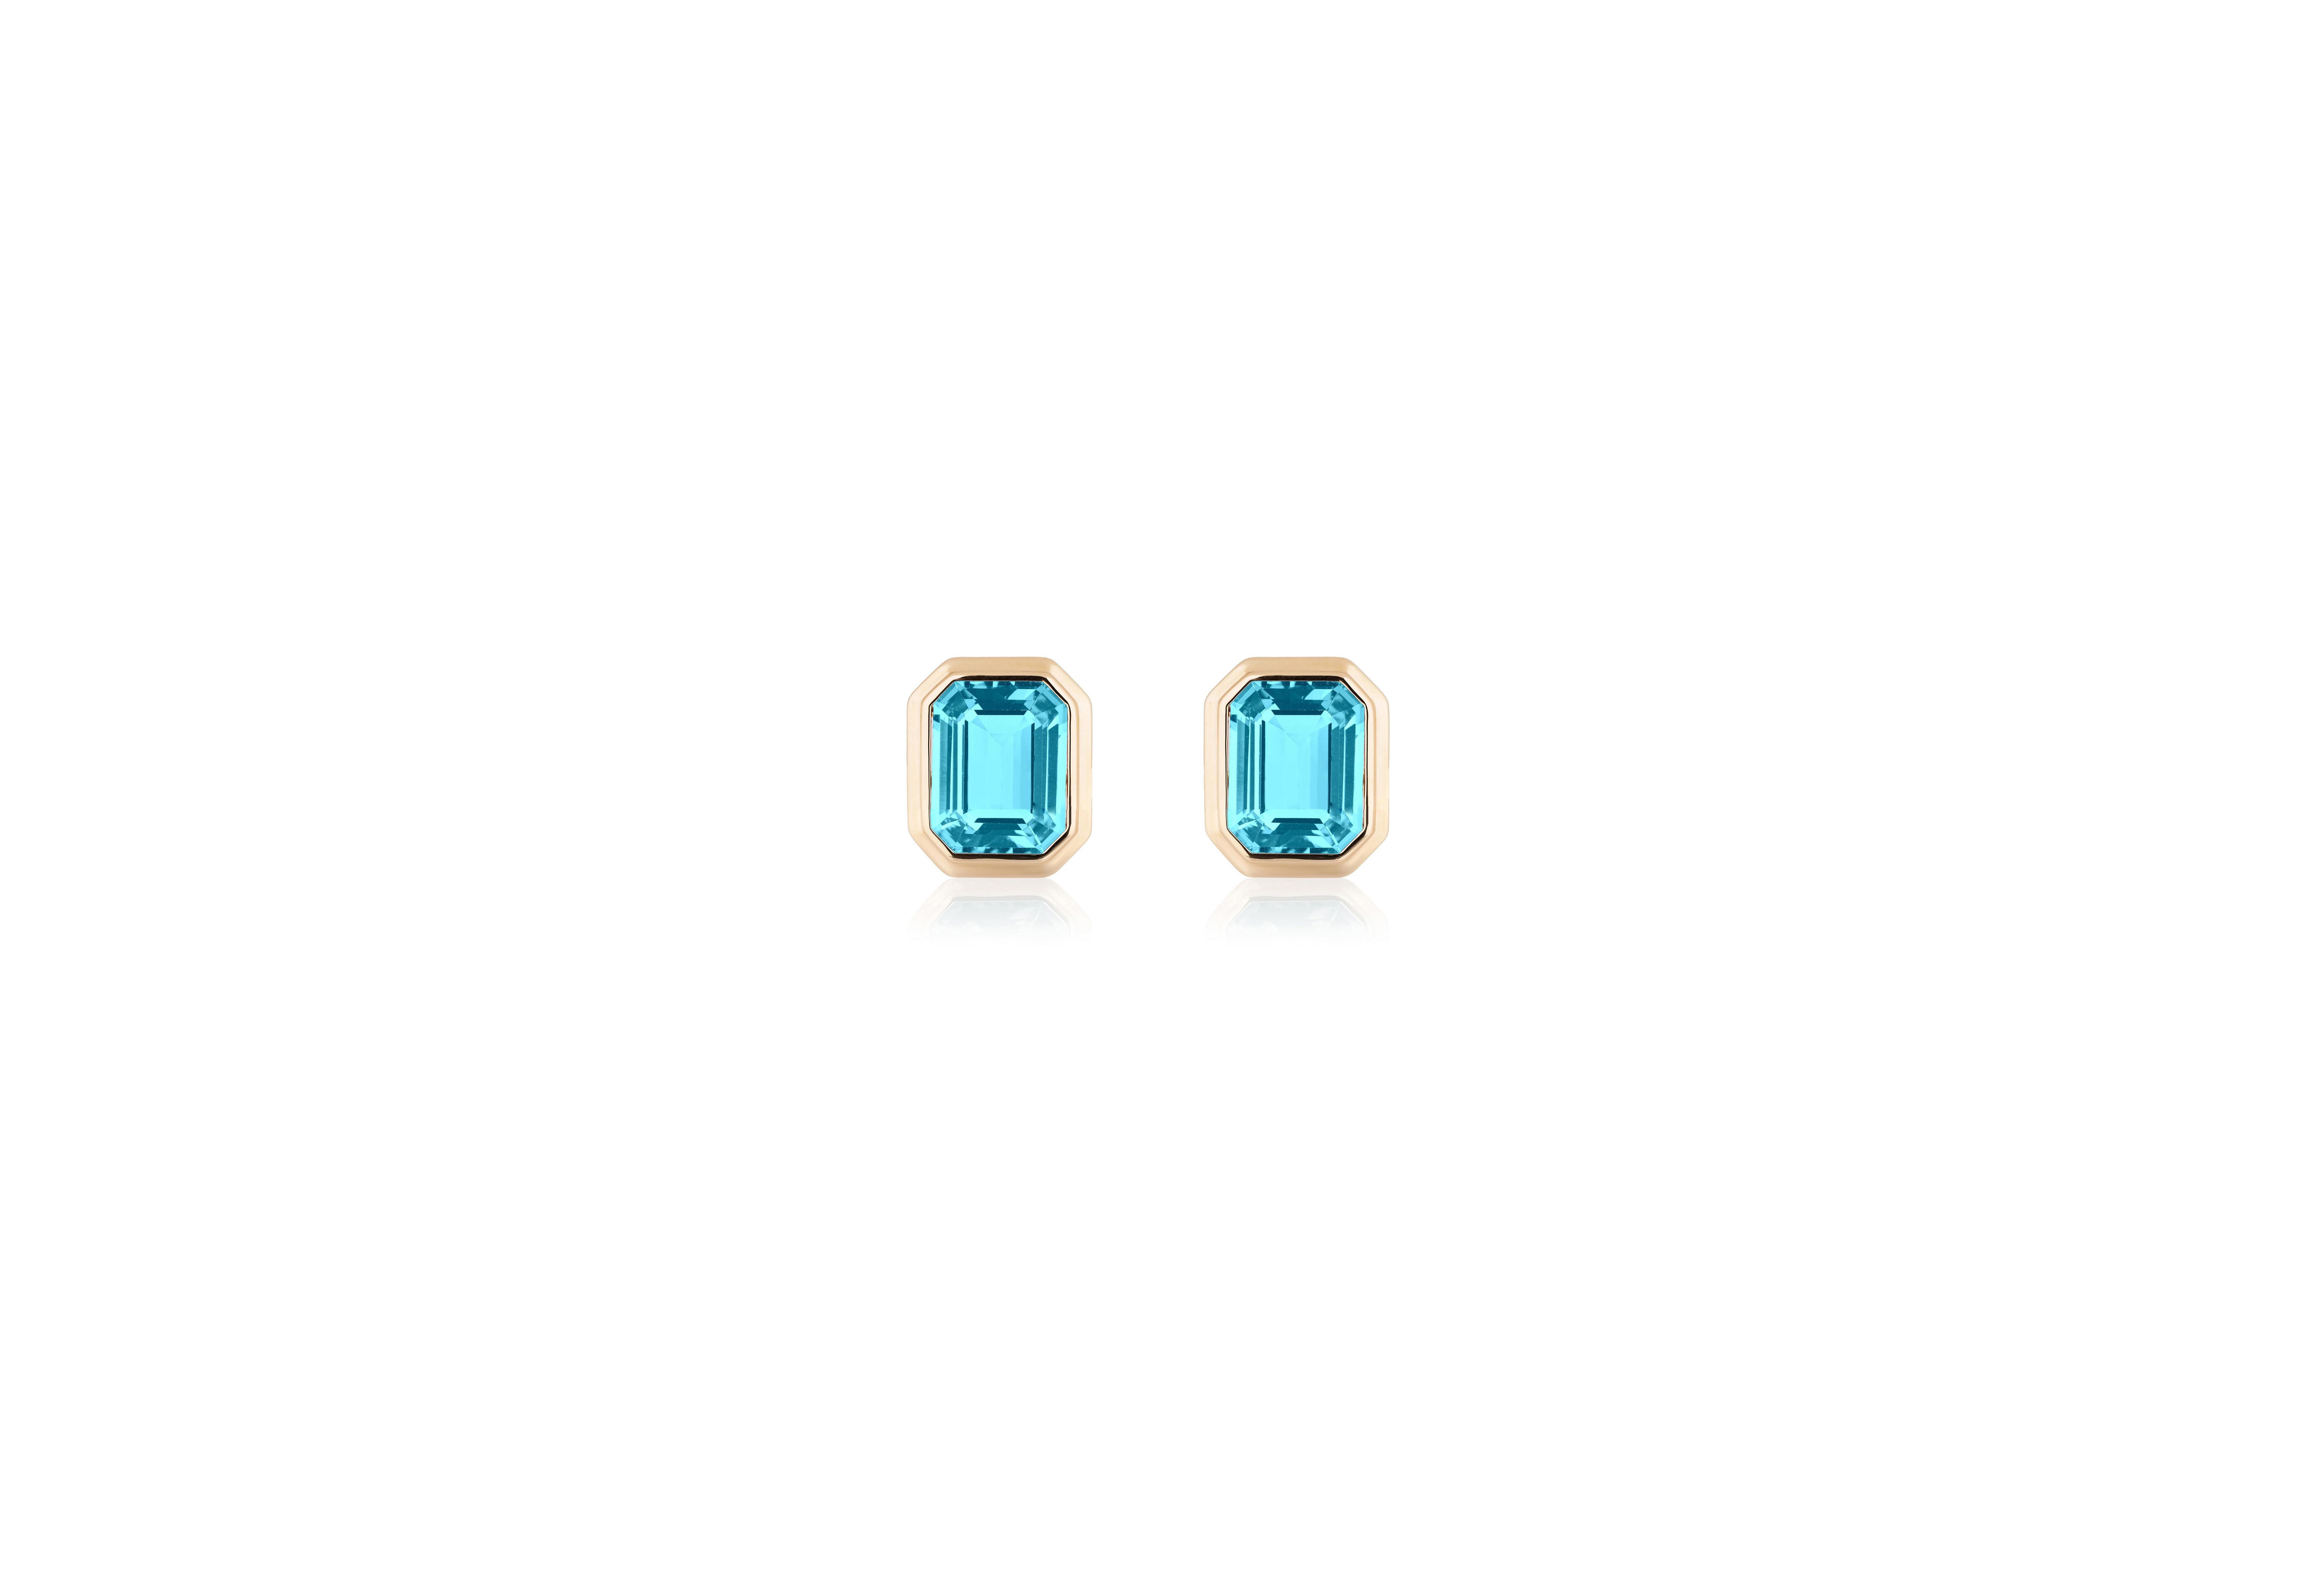 These Blue Topaz Emerald Cut Bezel Set Stud Earrings in 18K Yellow Gold from the 'Manhattan' Collection are an exquisite pair of earrings that exude elegance and sophistication. These earrings feature vibrant blue topaz gemstones with a captivating